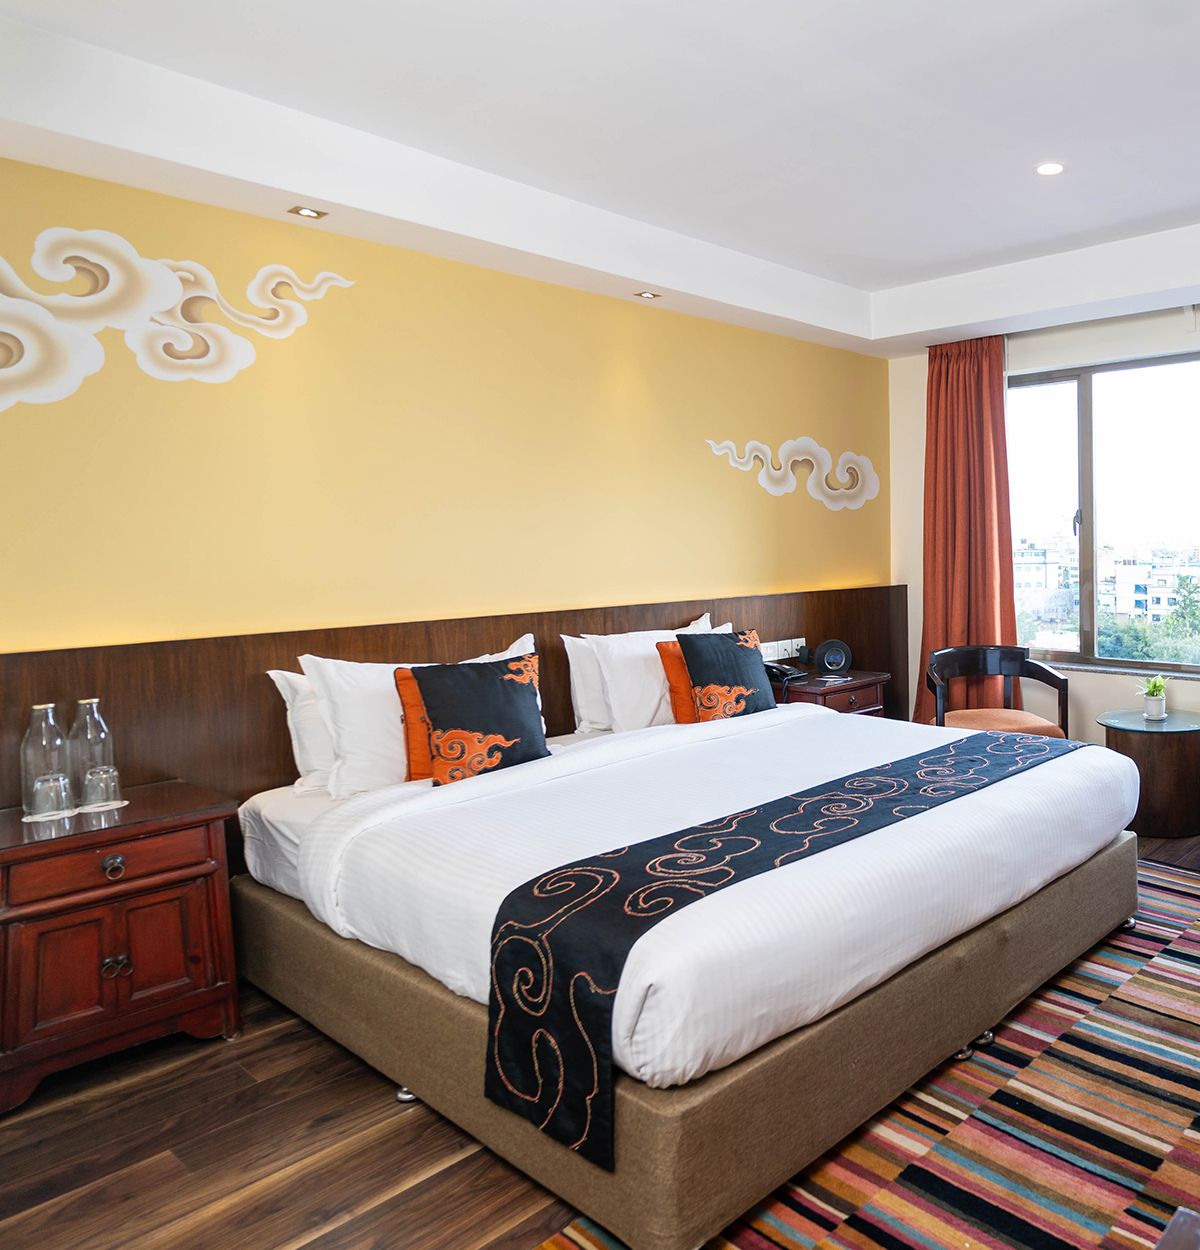 Executive rooms at boutique hotel in Kathmandu